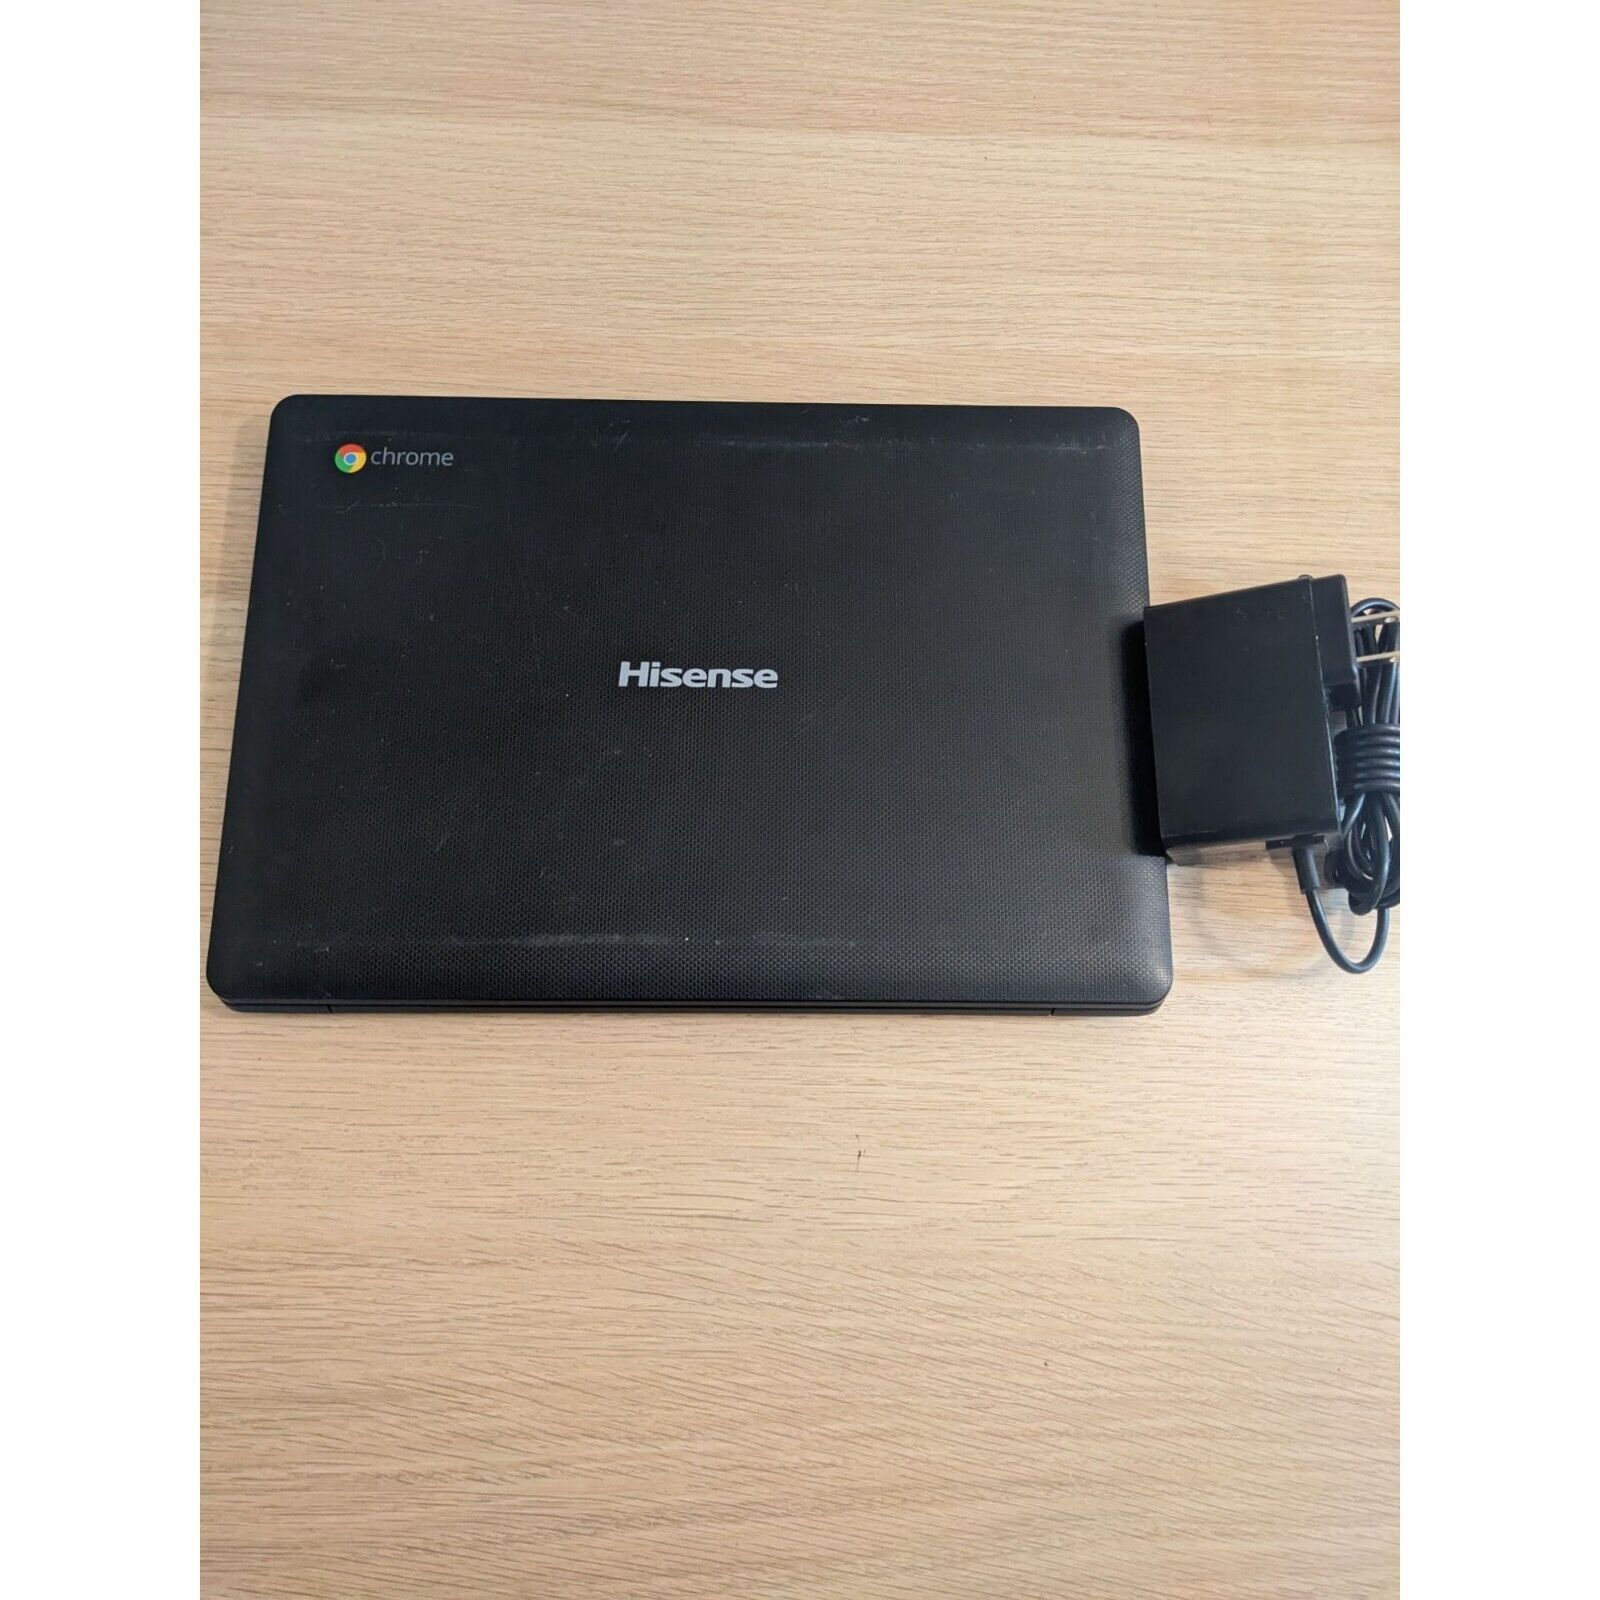 Hisense C11 Chromebook Wifi Works Great But Needs New Battery